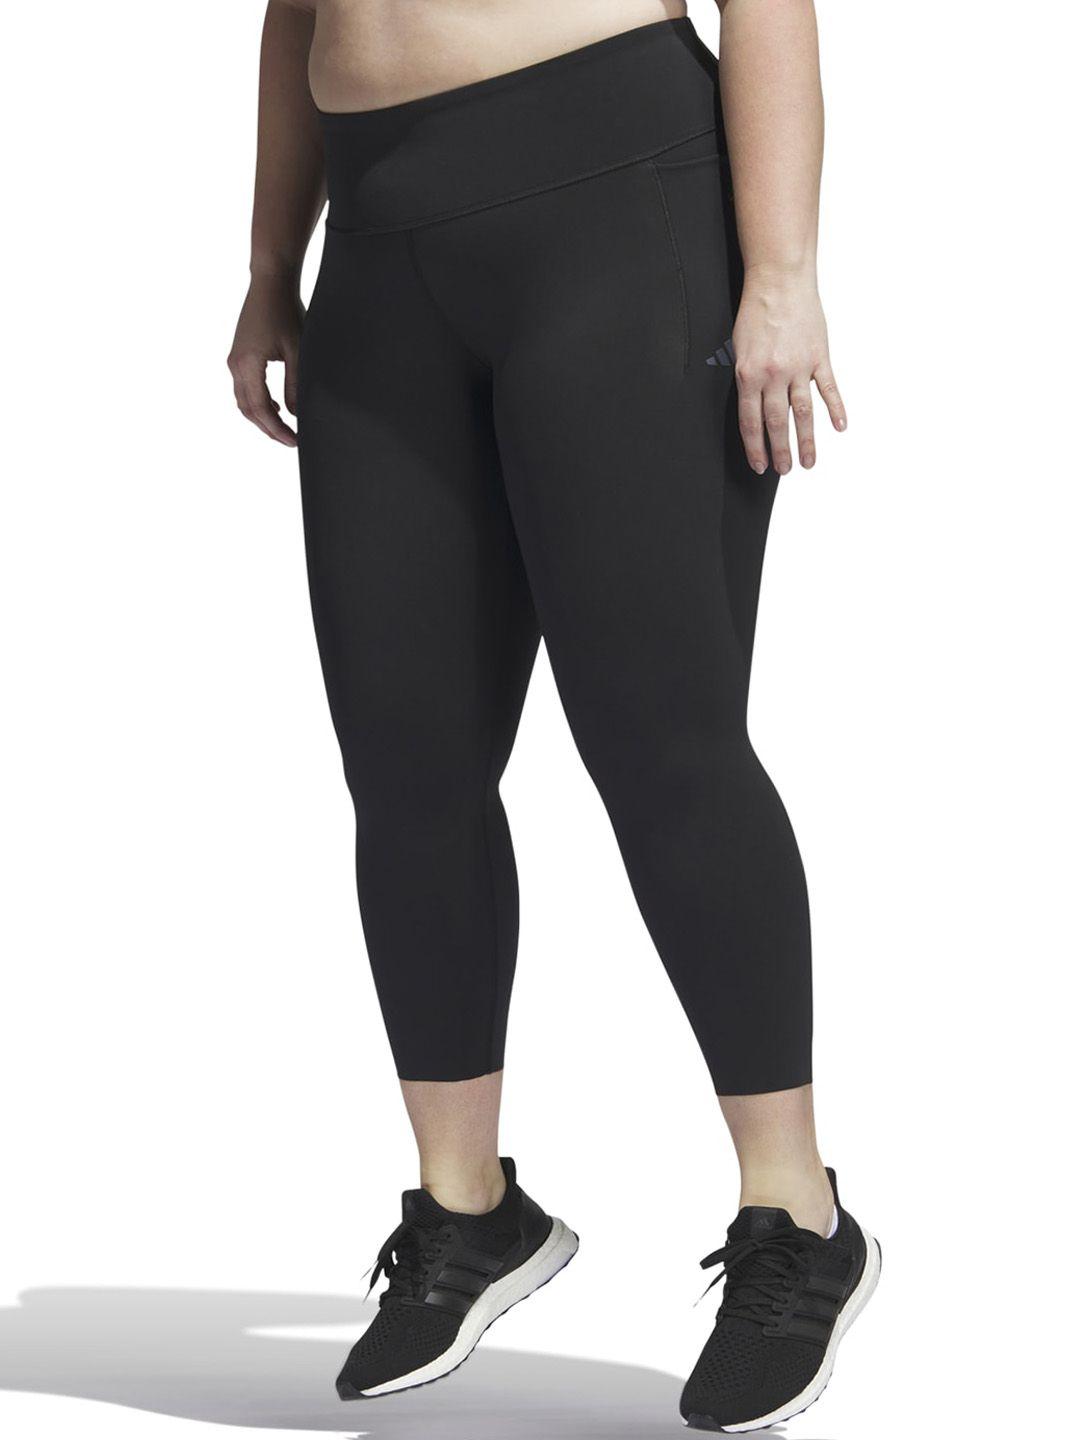 adidas opt luxe 7/8 women ankle-length gym tights